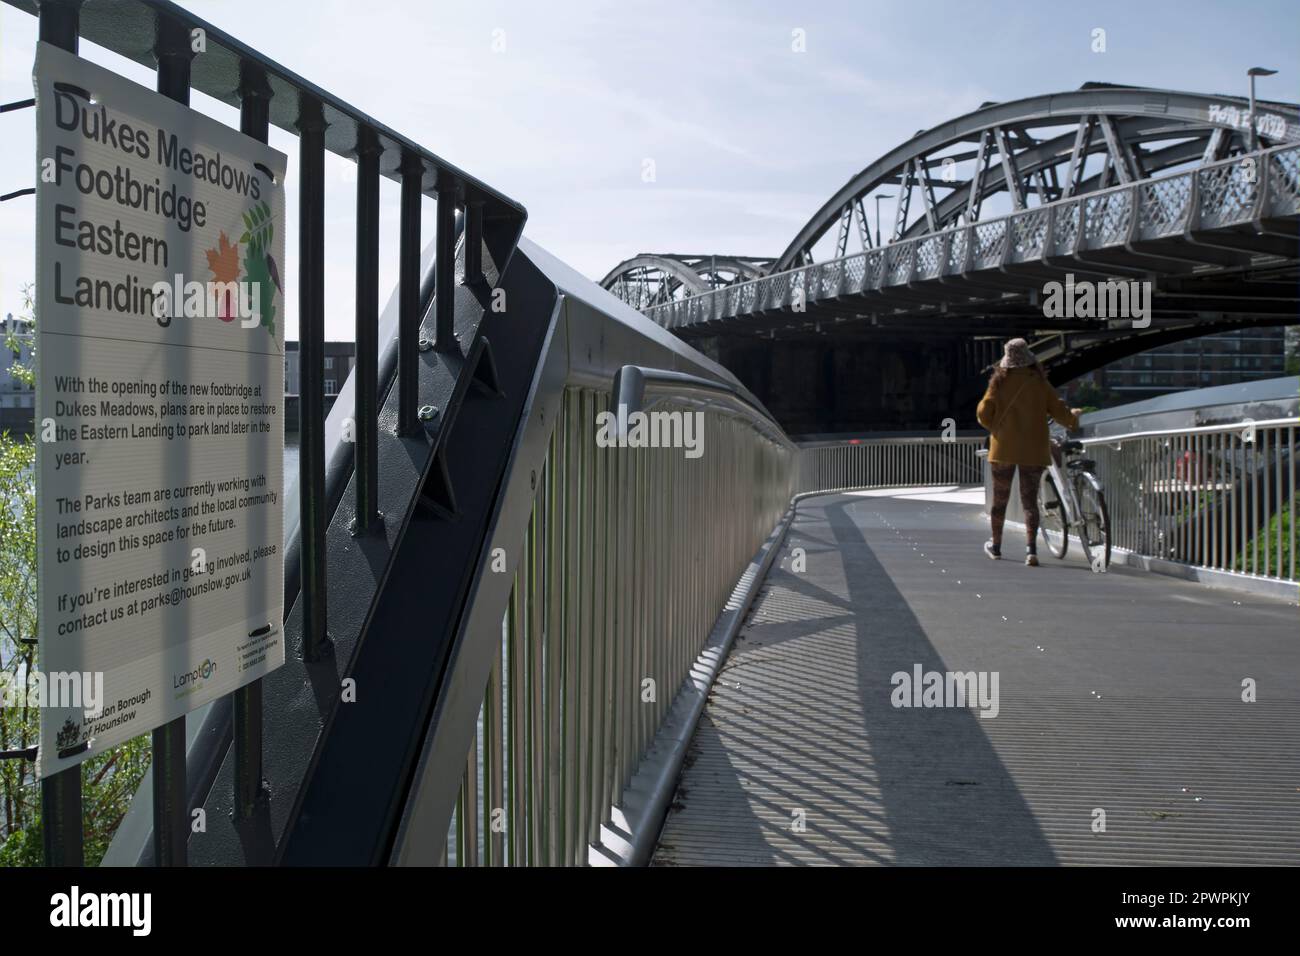 a woman pushes a bicycle on dukes meadows footbridge, below barnes bridge on the river thames, chiswick, london, england, with council notice beside Stock Photo